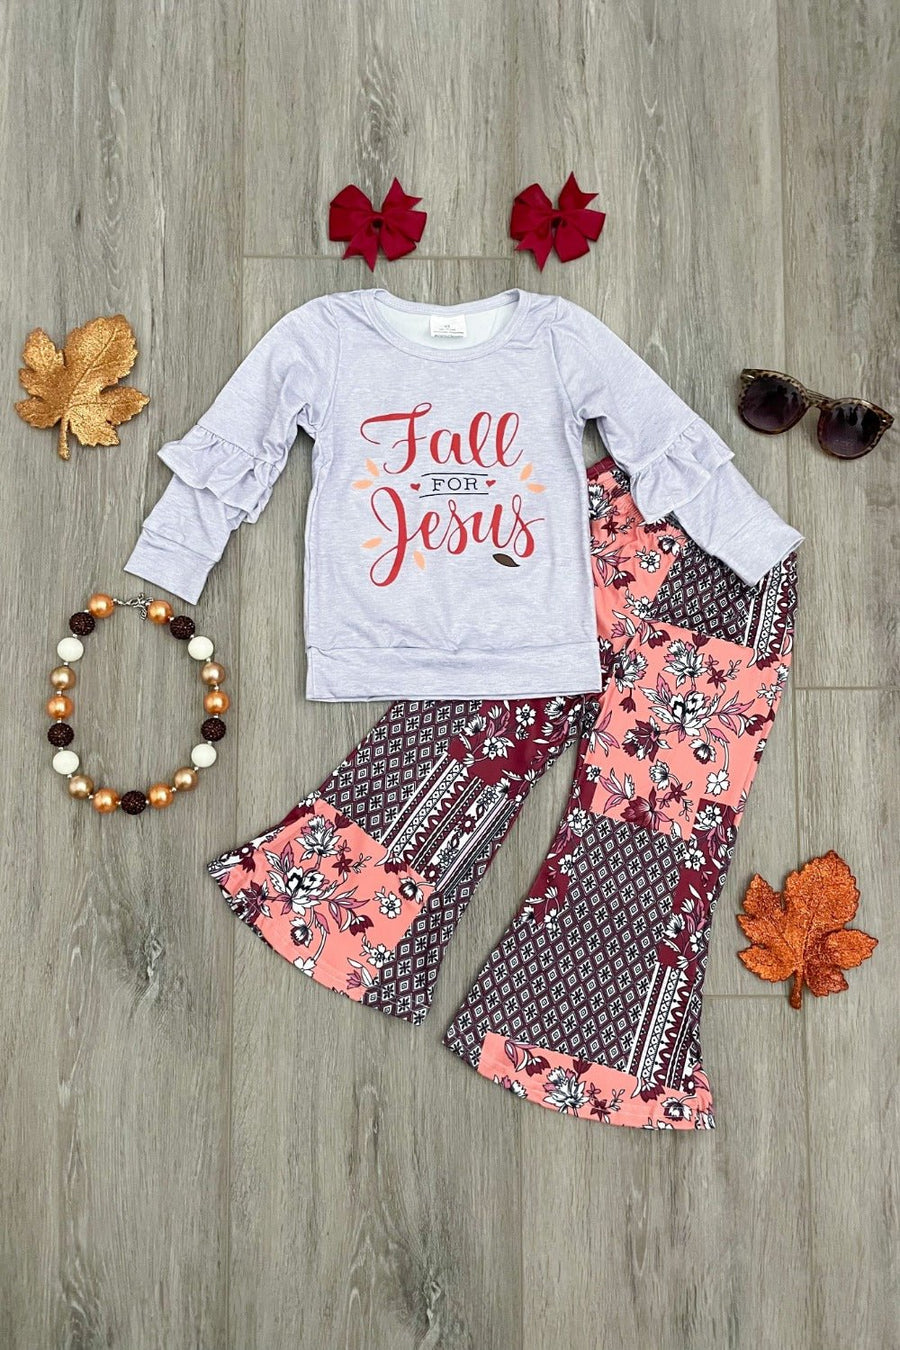 "Fall for Jesus" Boutique Outfit - Rylee Faith Designs